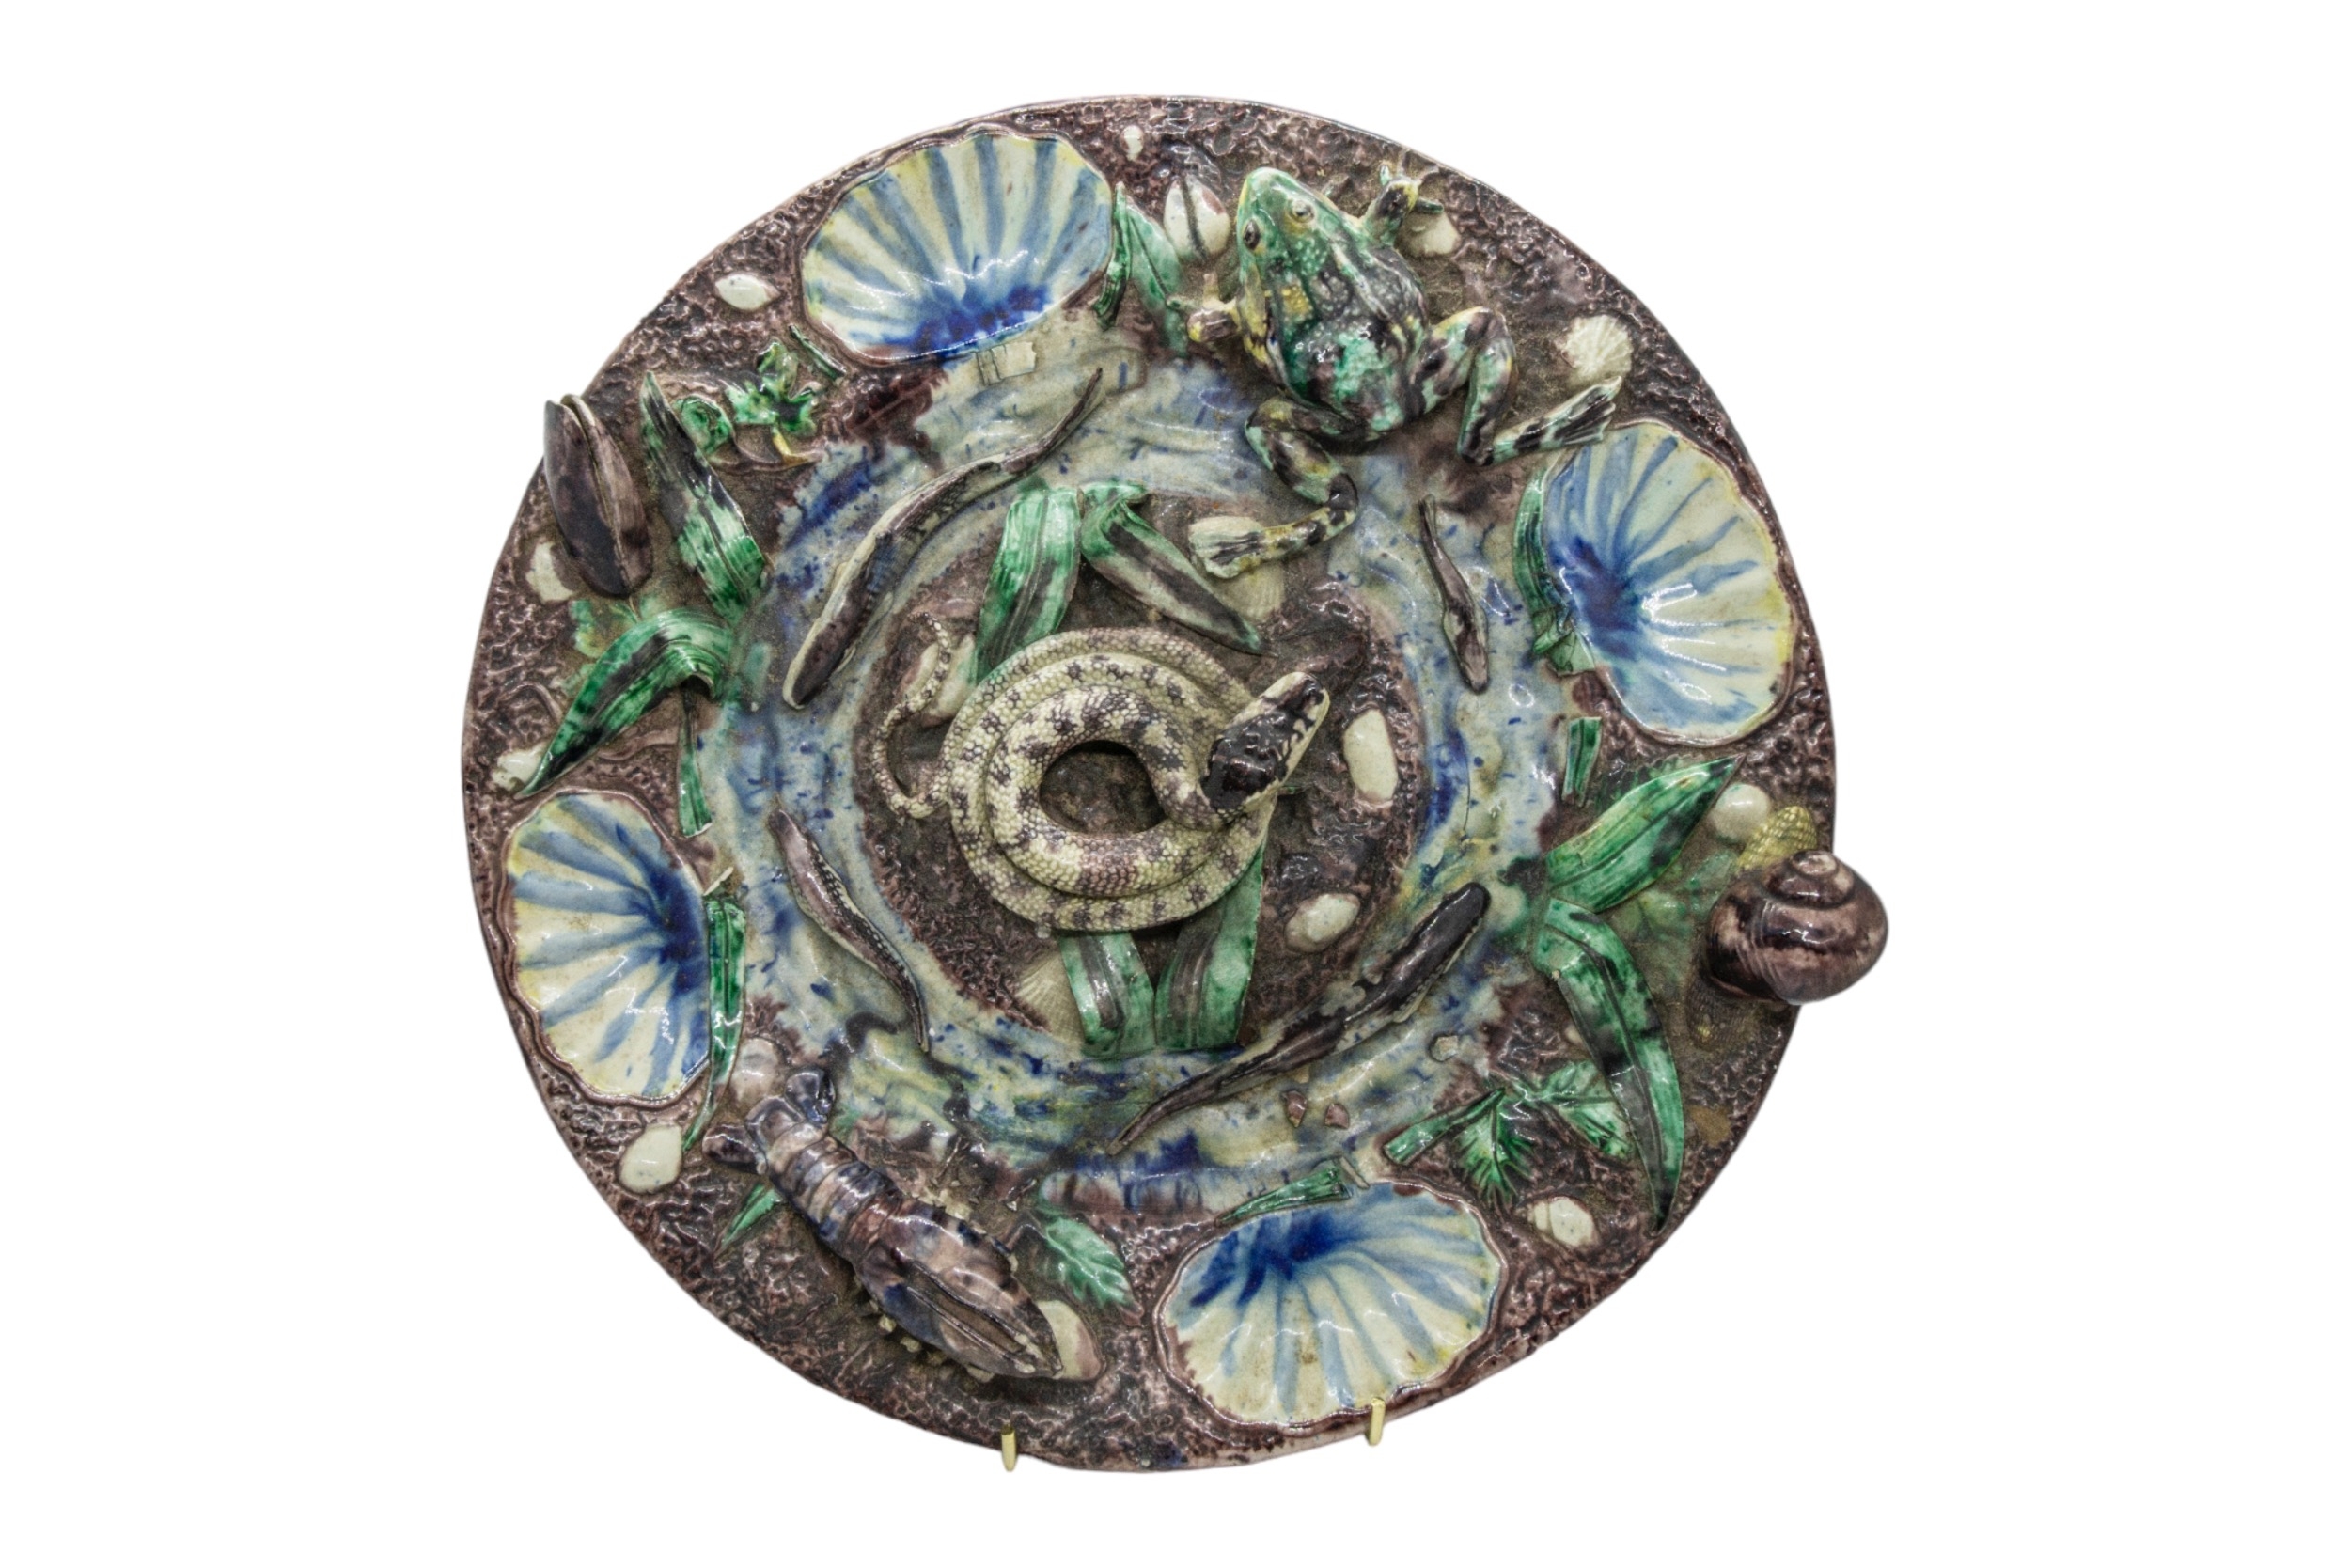 A PALISSY STYLE PLATTER 19th Century, together with a Palissy style jug, cover and stand. - Image 3 of 4